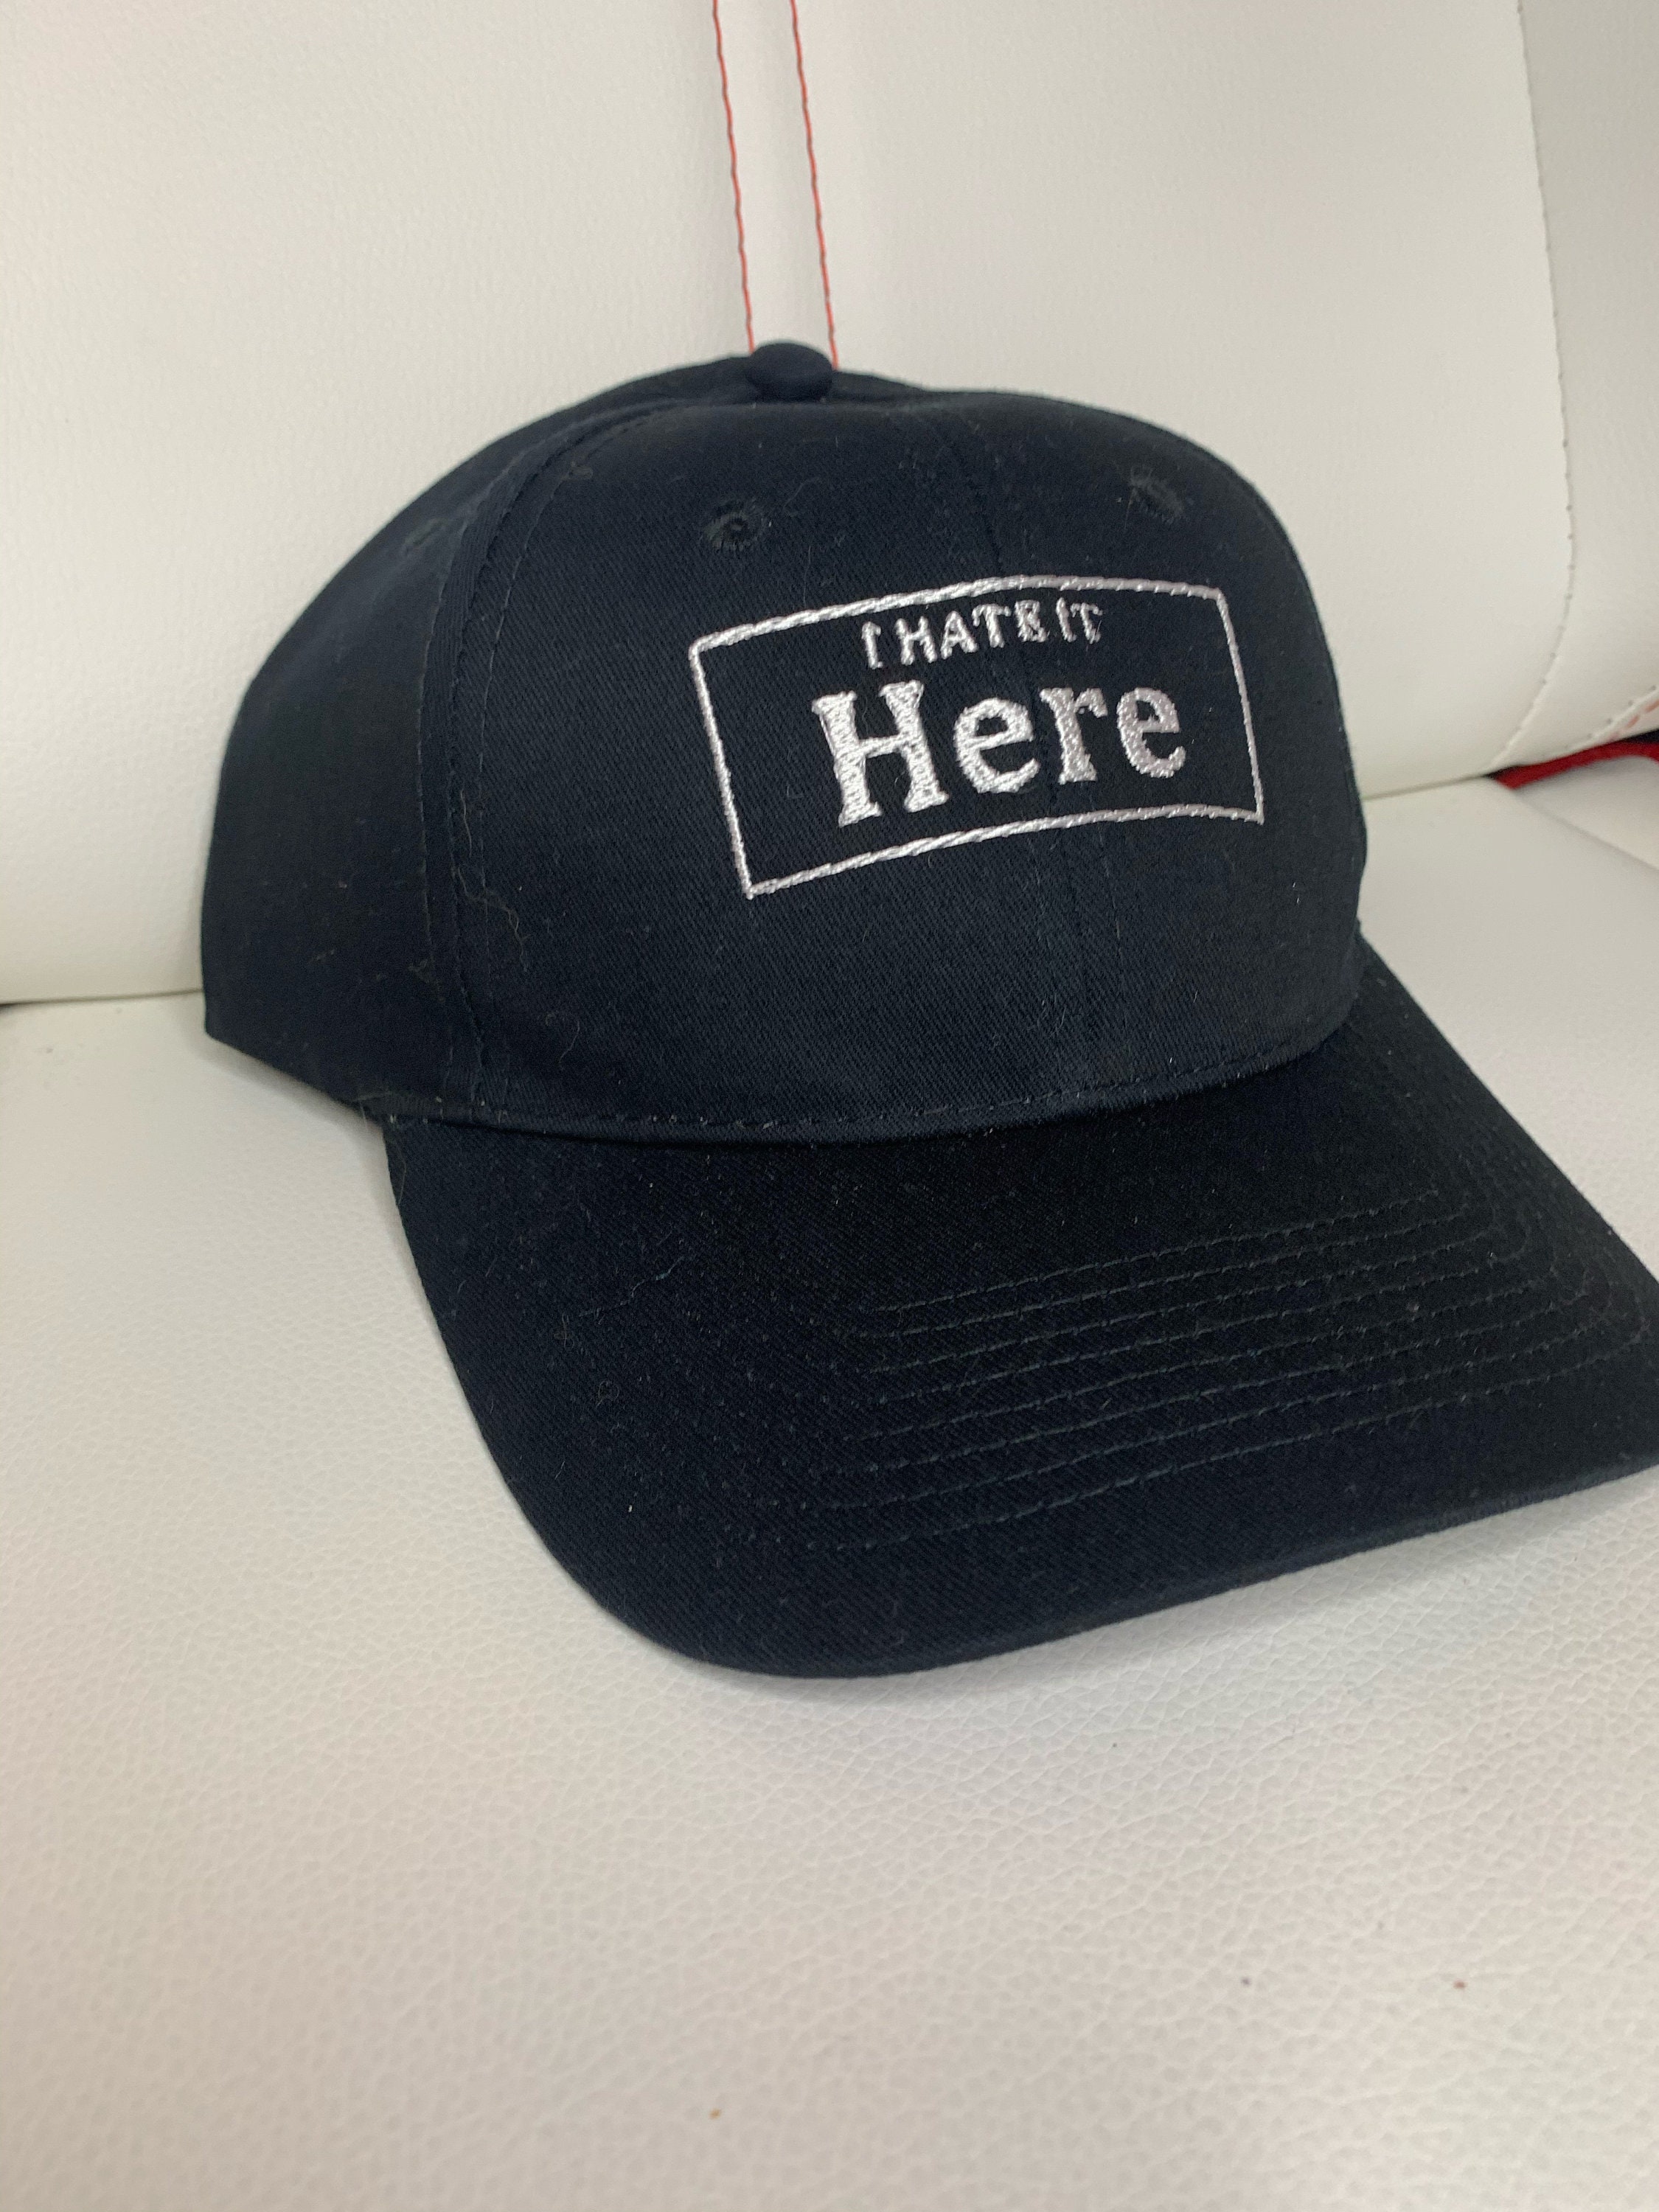 I Hate It Here Black Hat - Etsy